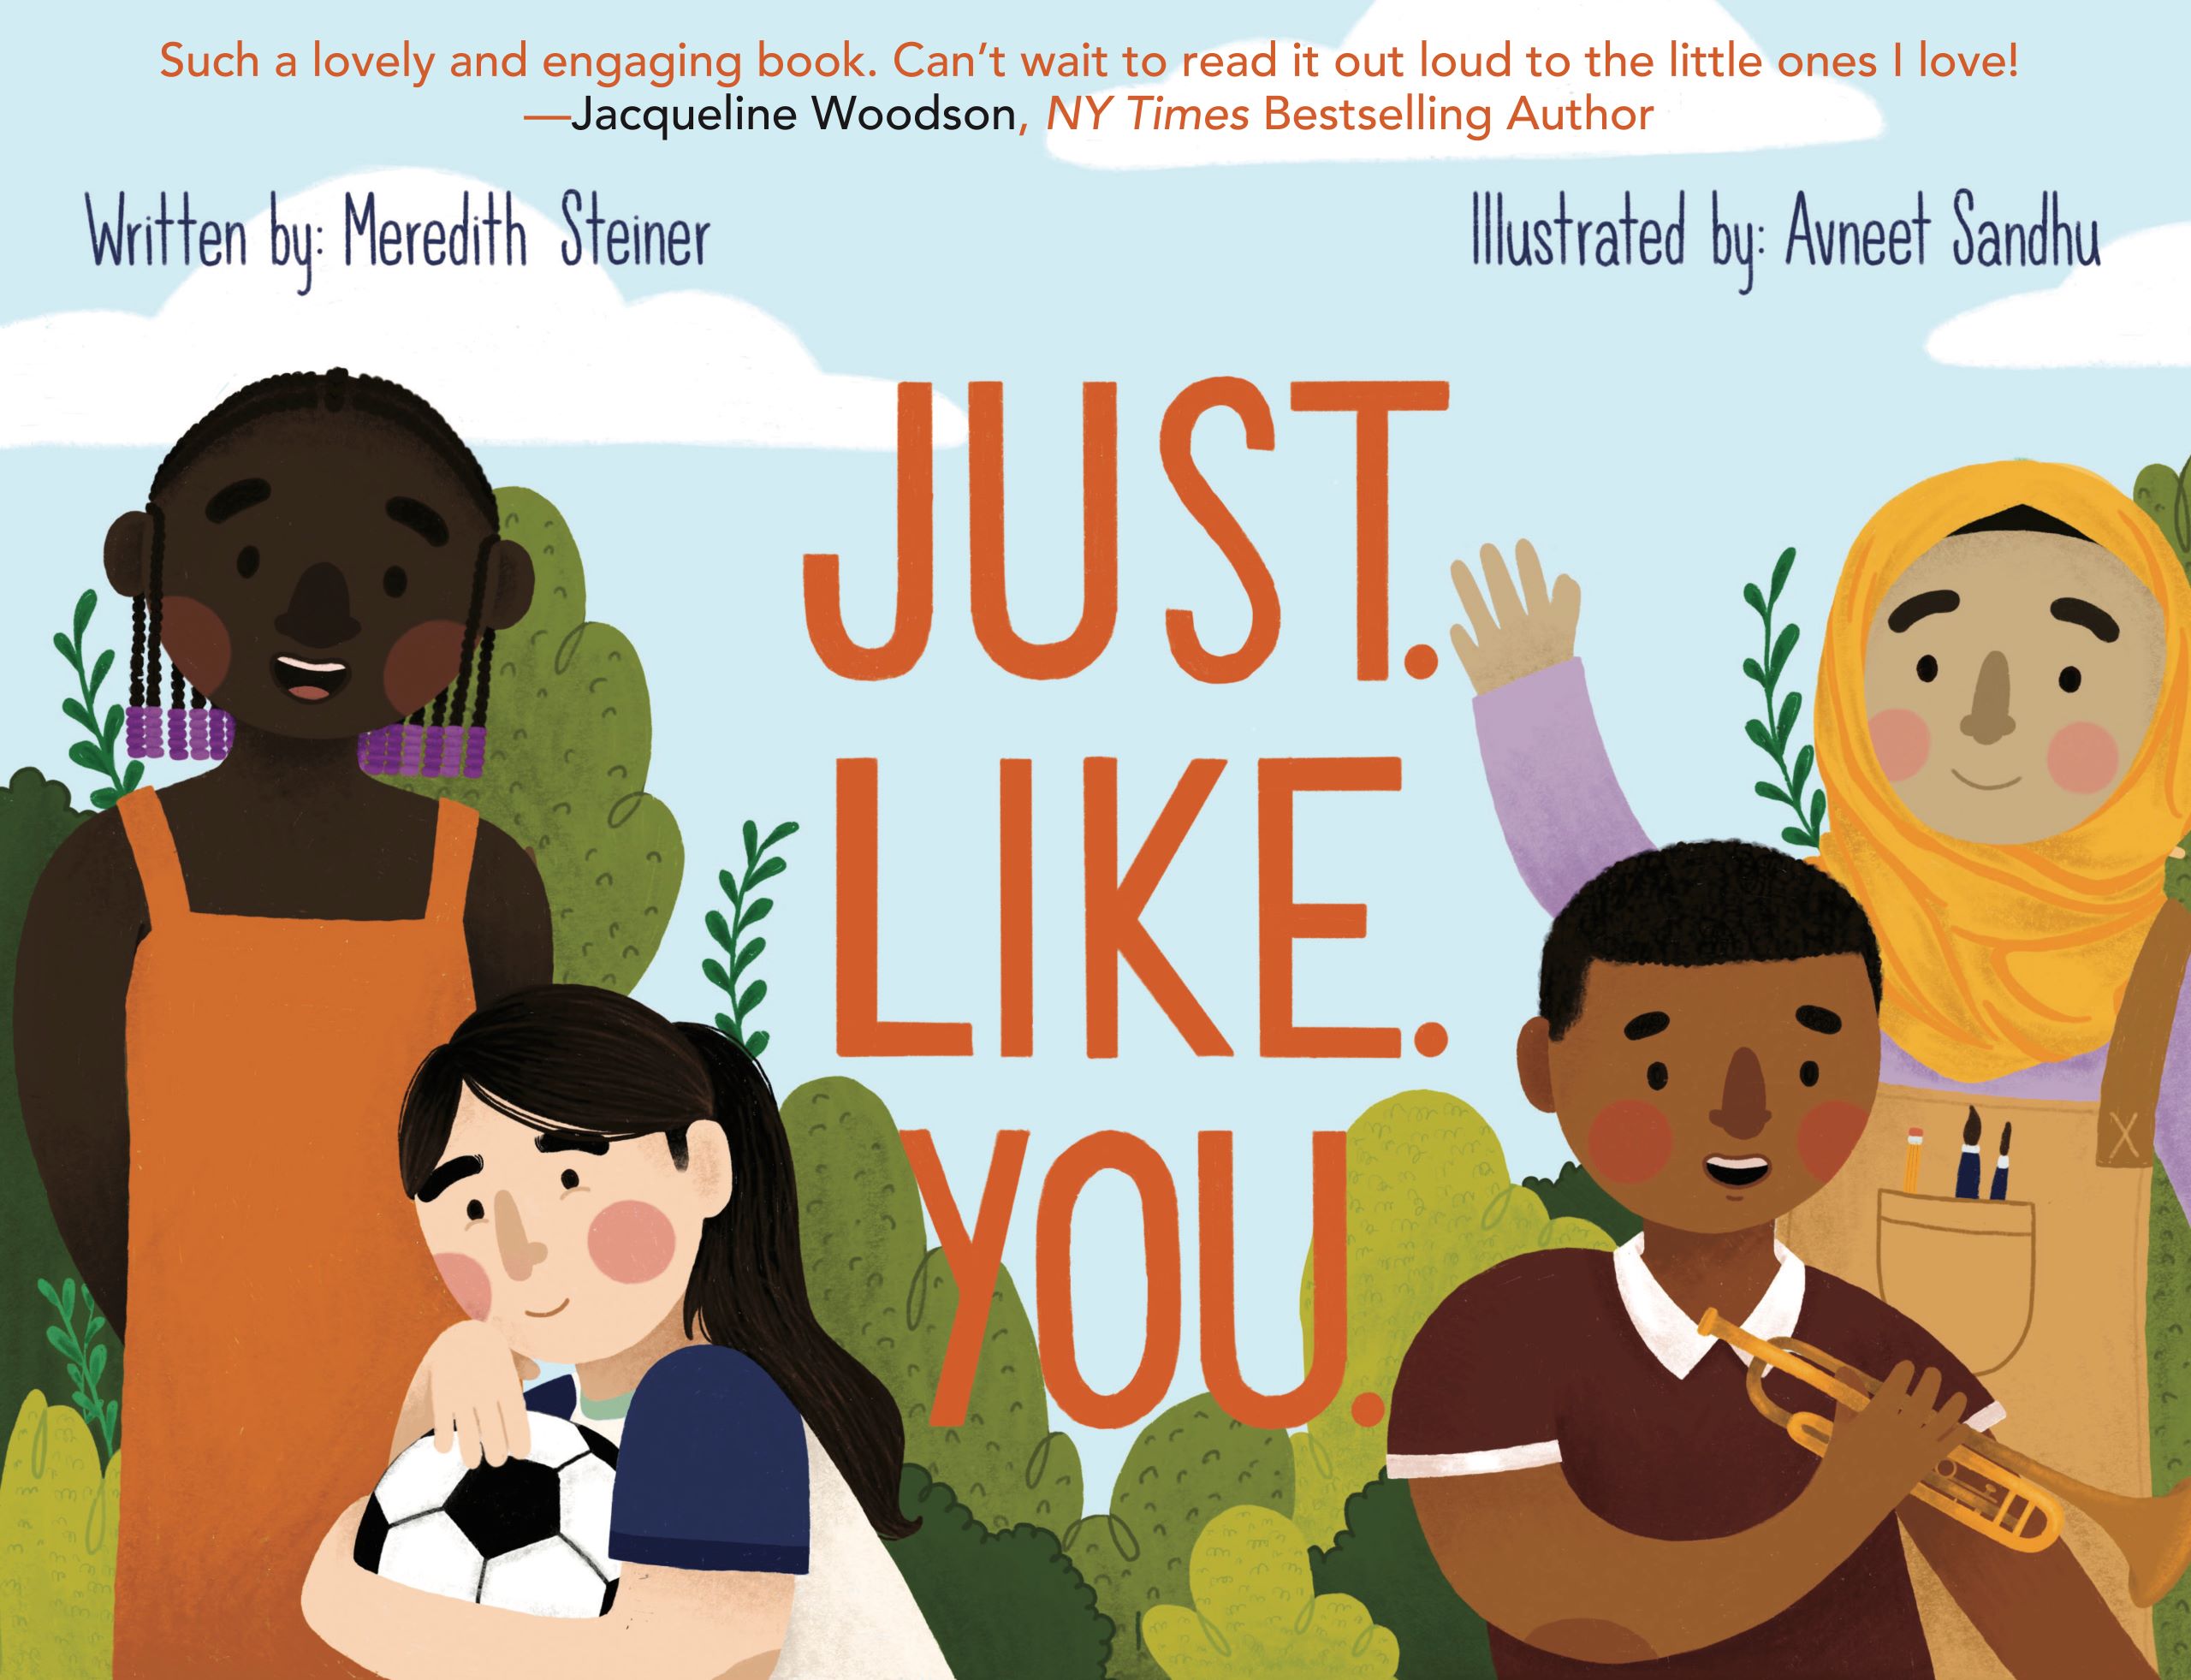 Meredith Steiner to Participate in the Kentucky Book Festival with “Just. Like. You.”